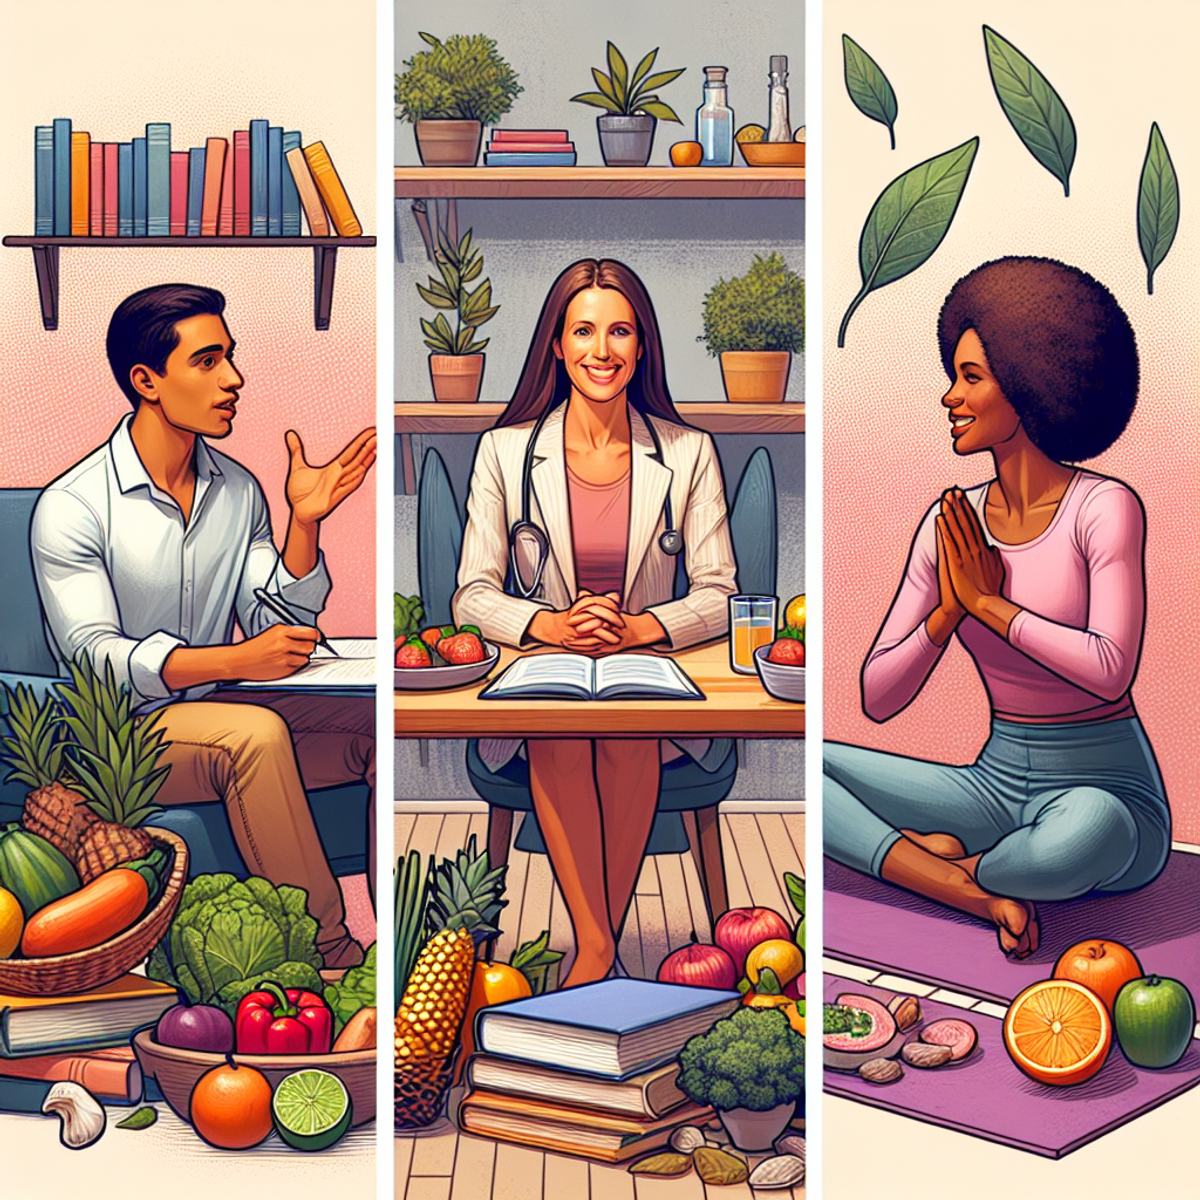 A vibrant digital art representation of a diverse group of wellness professionals, symbolizing the variety of perspectives and expertise in the field.